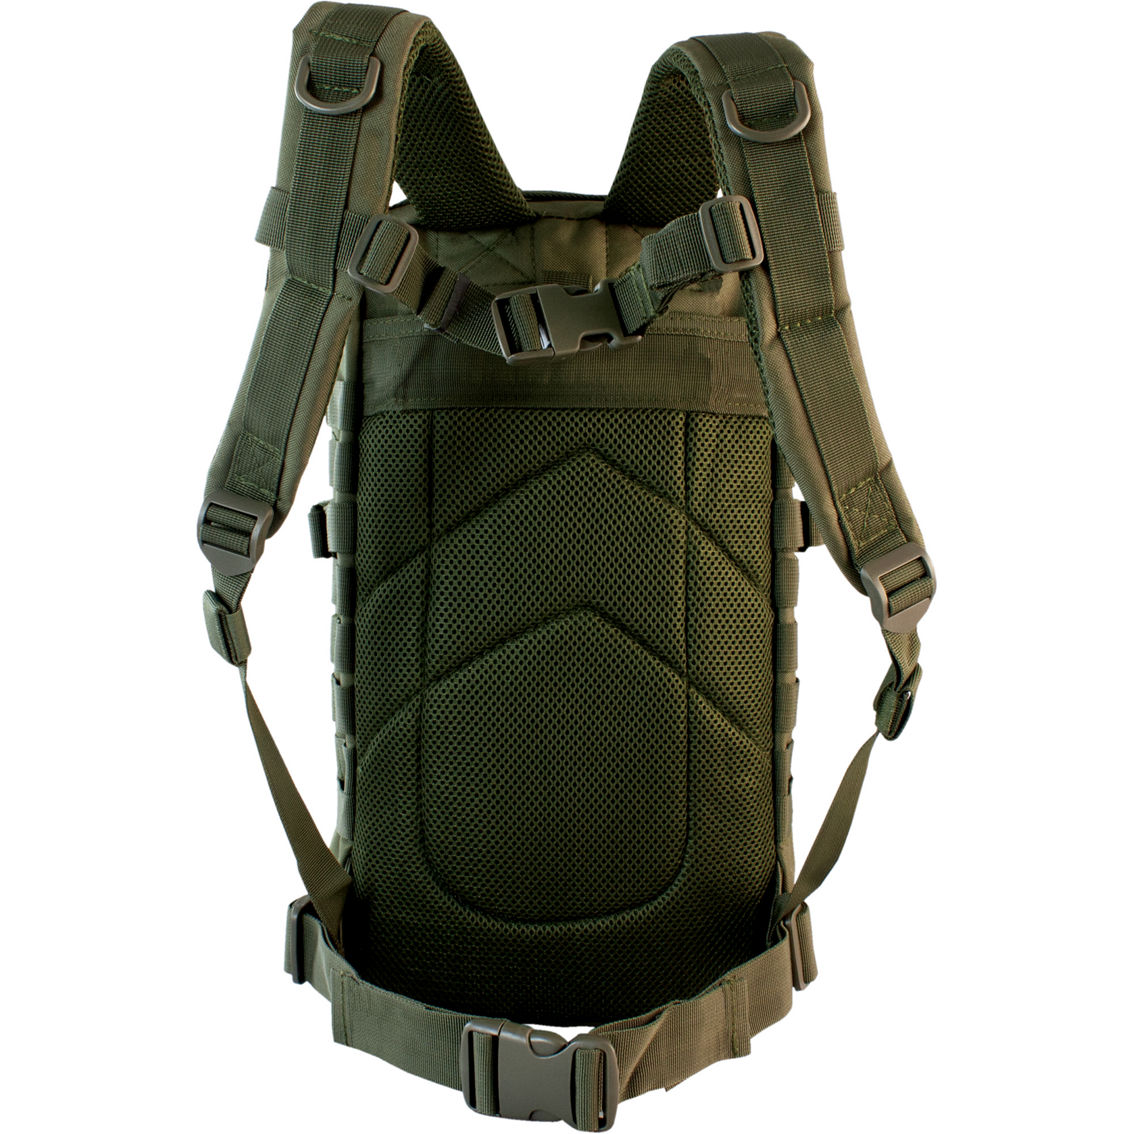 Red Rock Outdoor Gear Assault Pack - Image 2 of 7